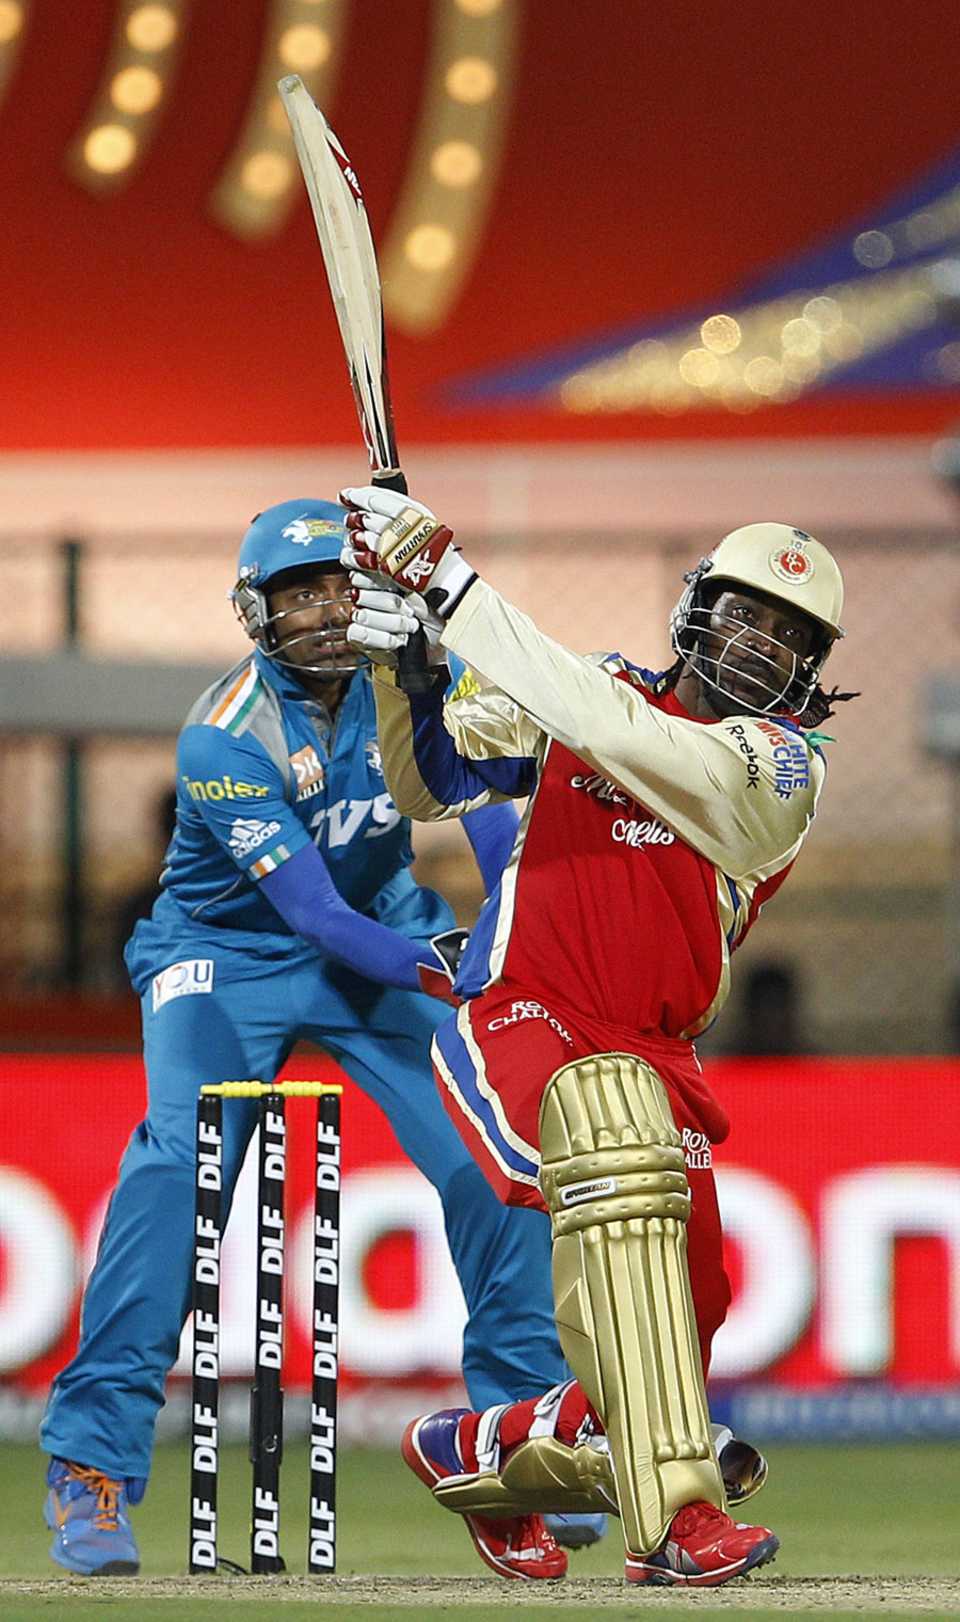 Chris Gayle slammed five sixes in an over, Royal Challengers Bangalore v Pune Warriors, IPL, Bangalore, April 17, 2012